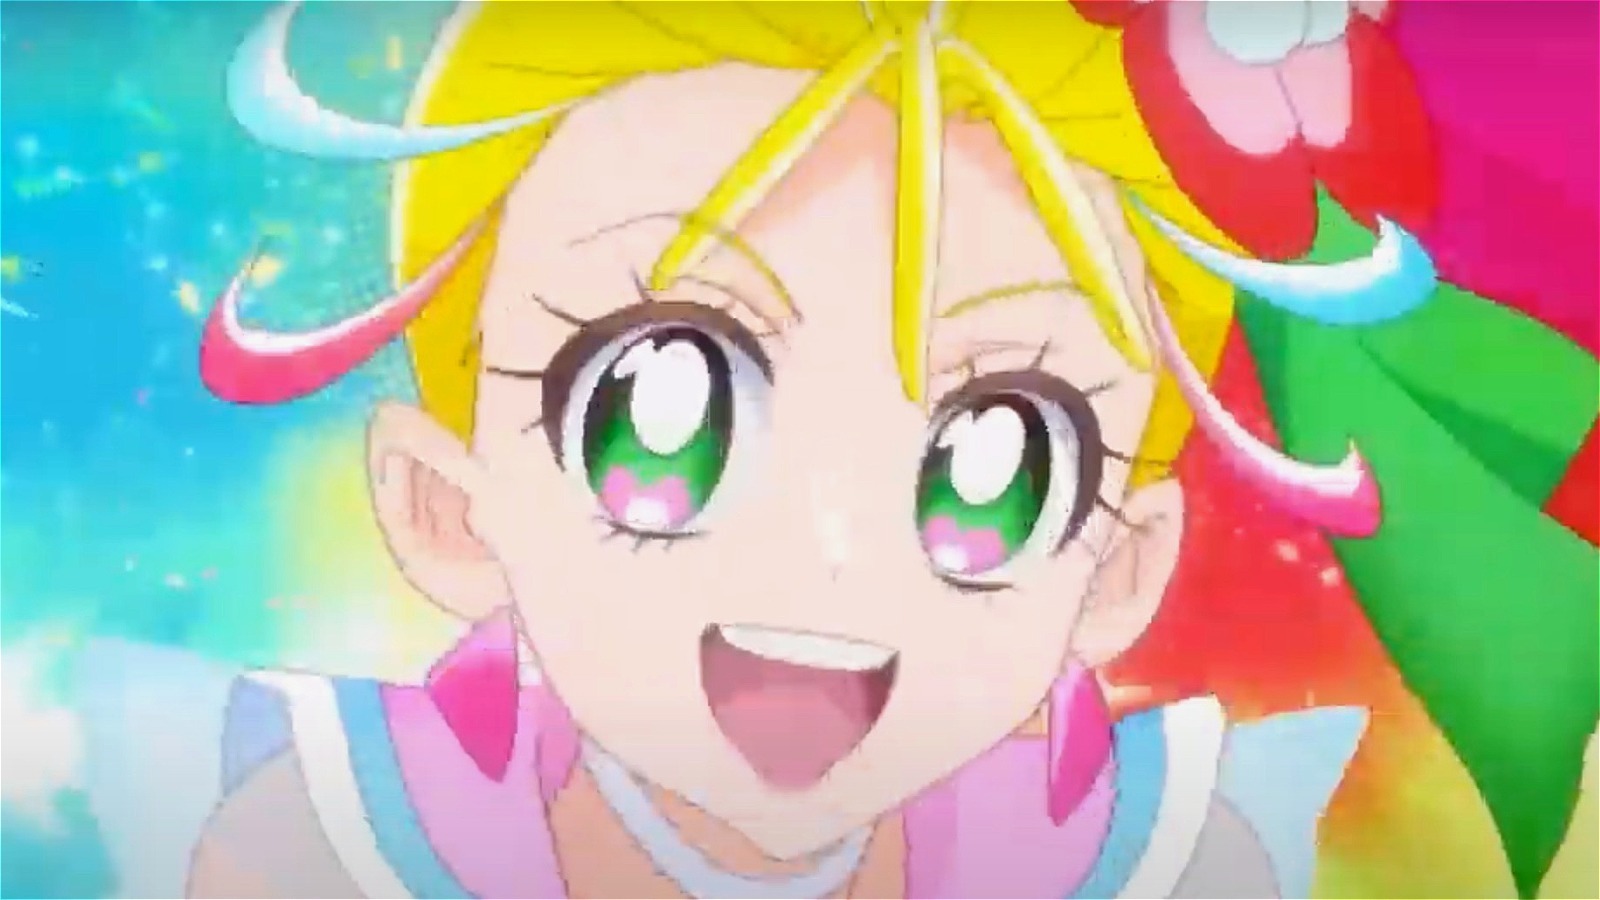 Why the Pretty Cure anime failed in America - Explained